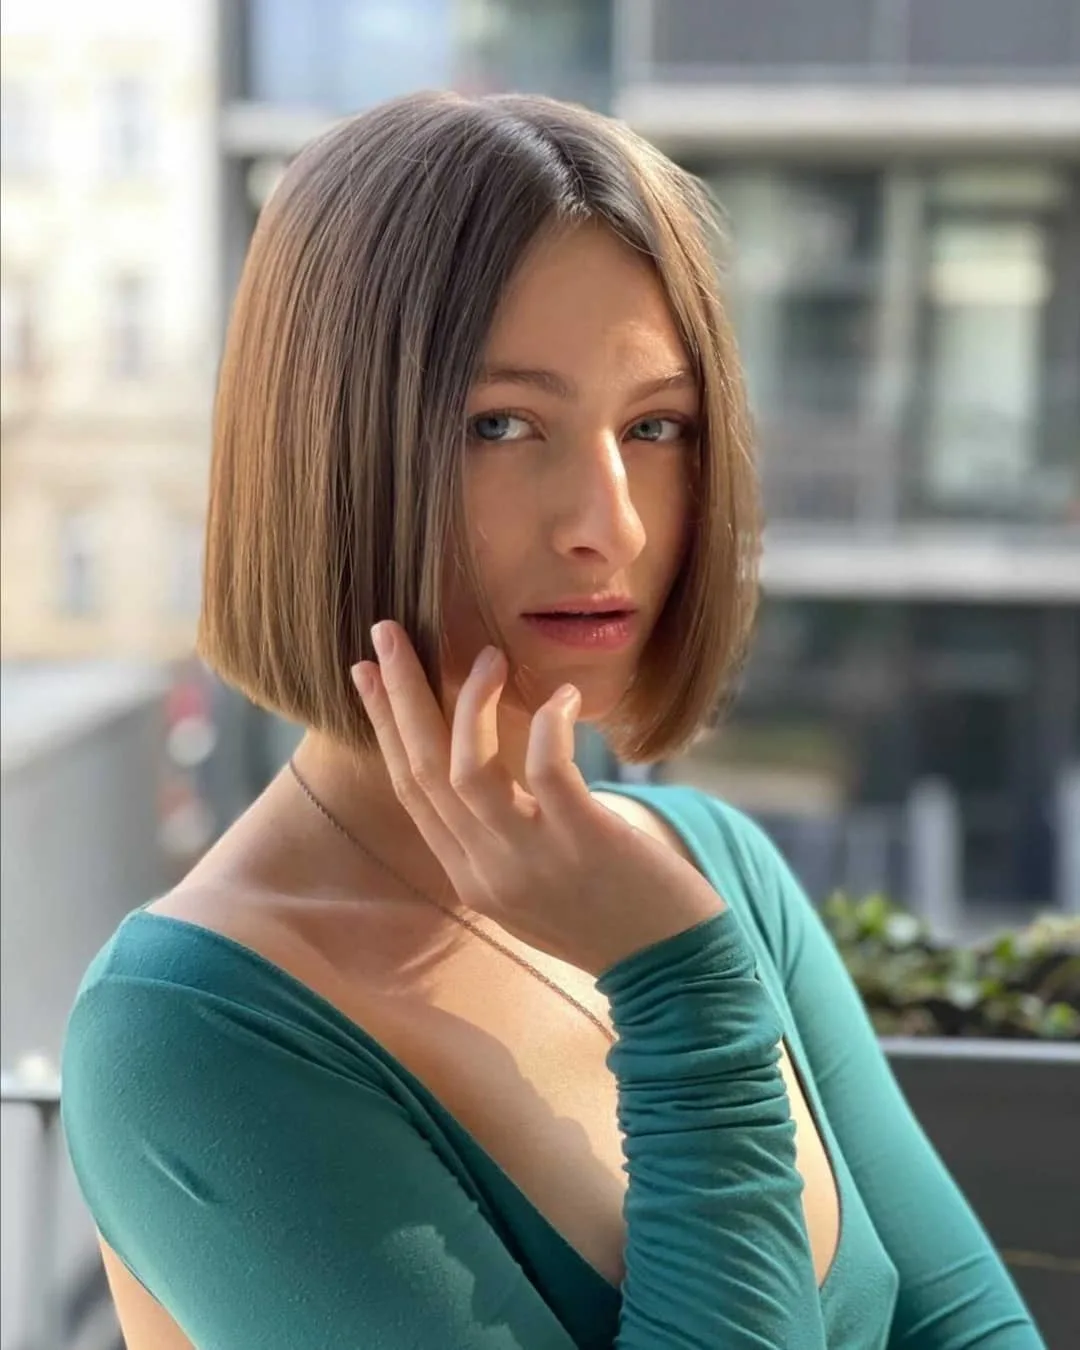 Petite Russian woman in a green open-back shirt stands on a balcony showing off her new bob haircut that is ash brown in color